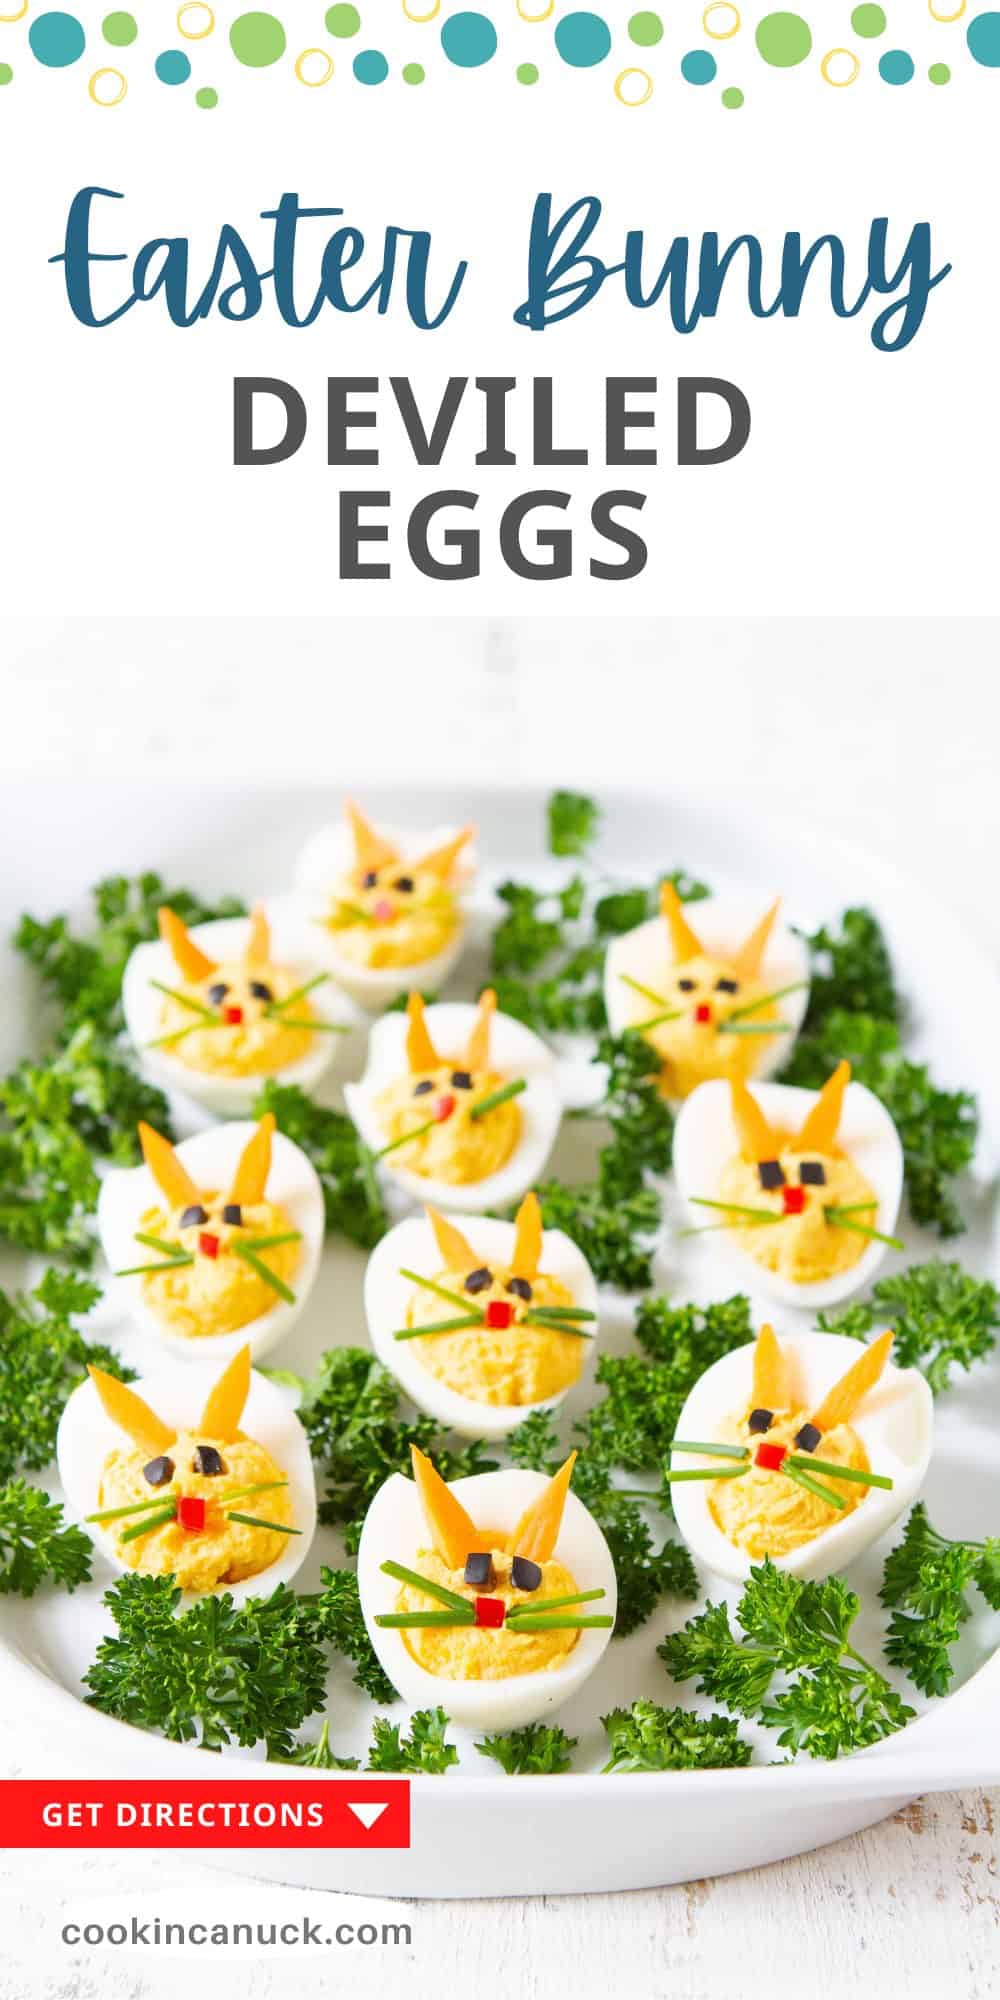 The cutest little appetizer just hopped into town! These Easter bunny deviled eggs are bound to be a hit with kids of all ages. | Ideas | Easy bunny deviled eggs | Recipe best | For Easter